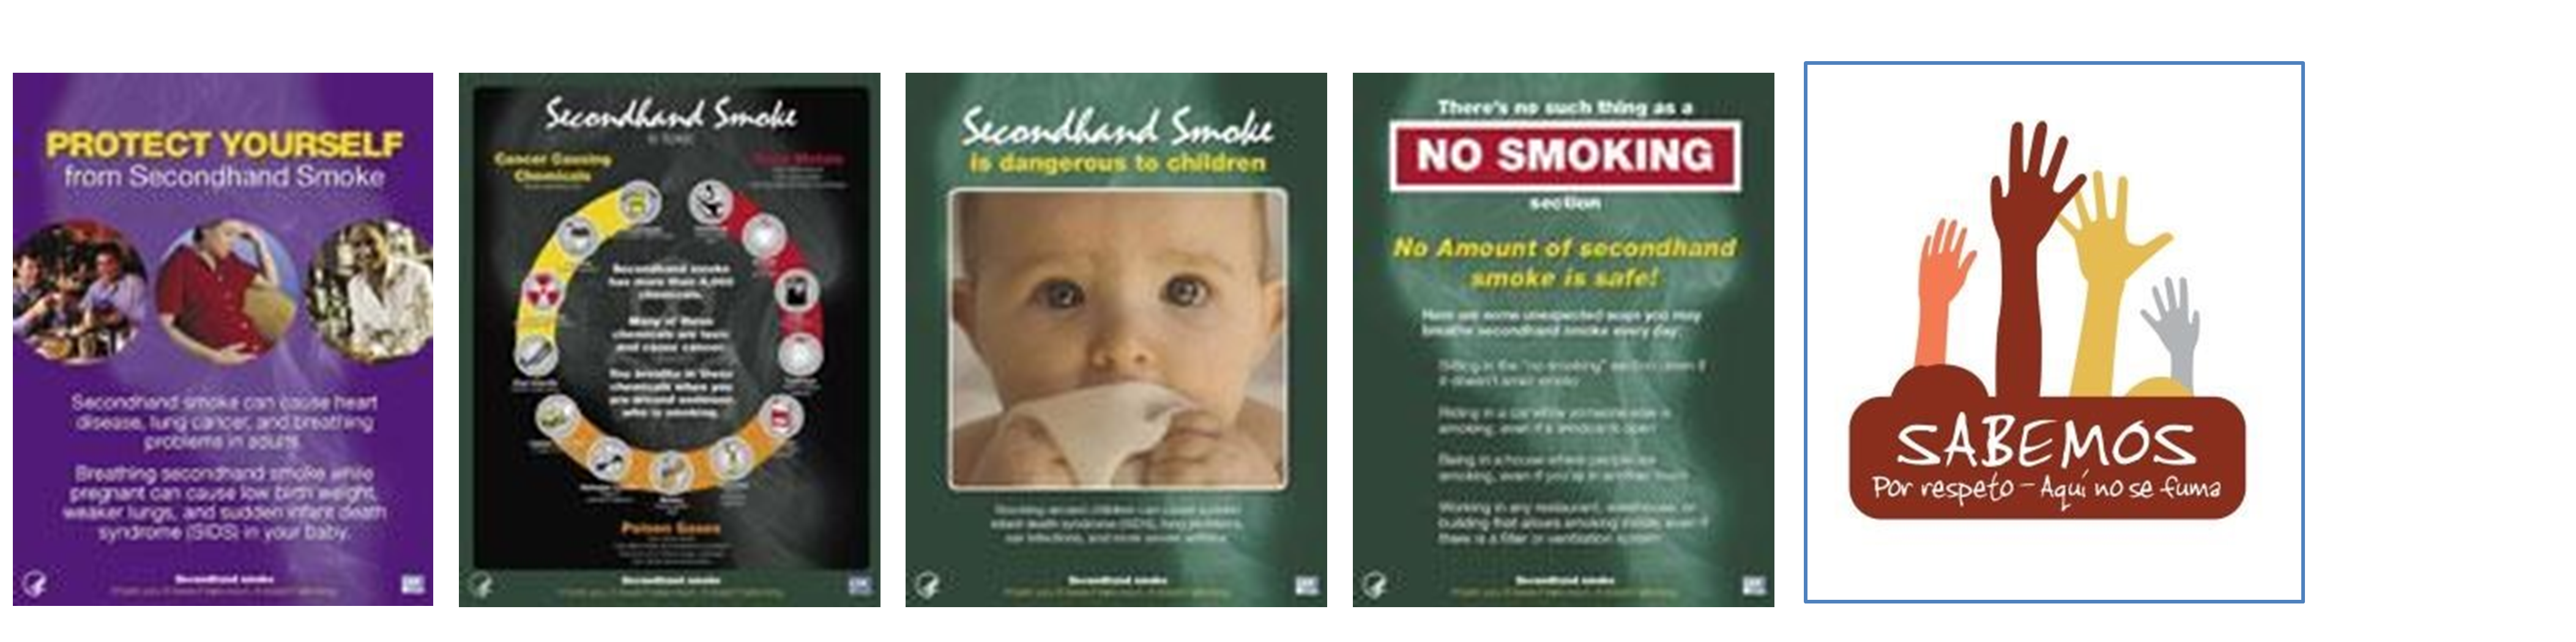 CDC Secondhand Smoke Posters